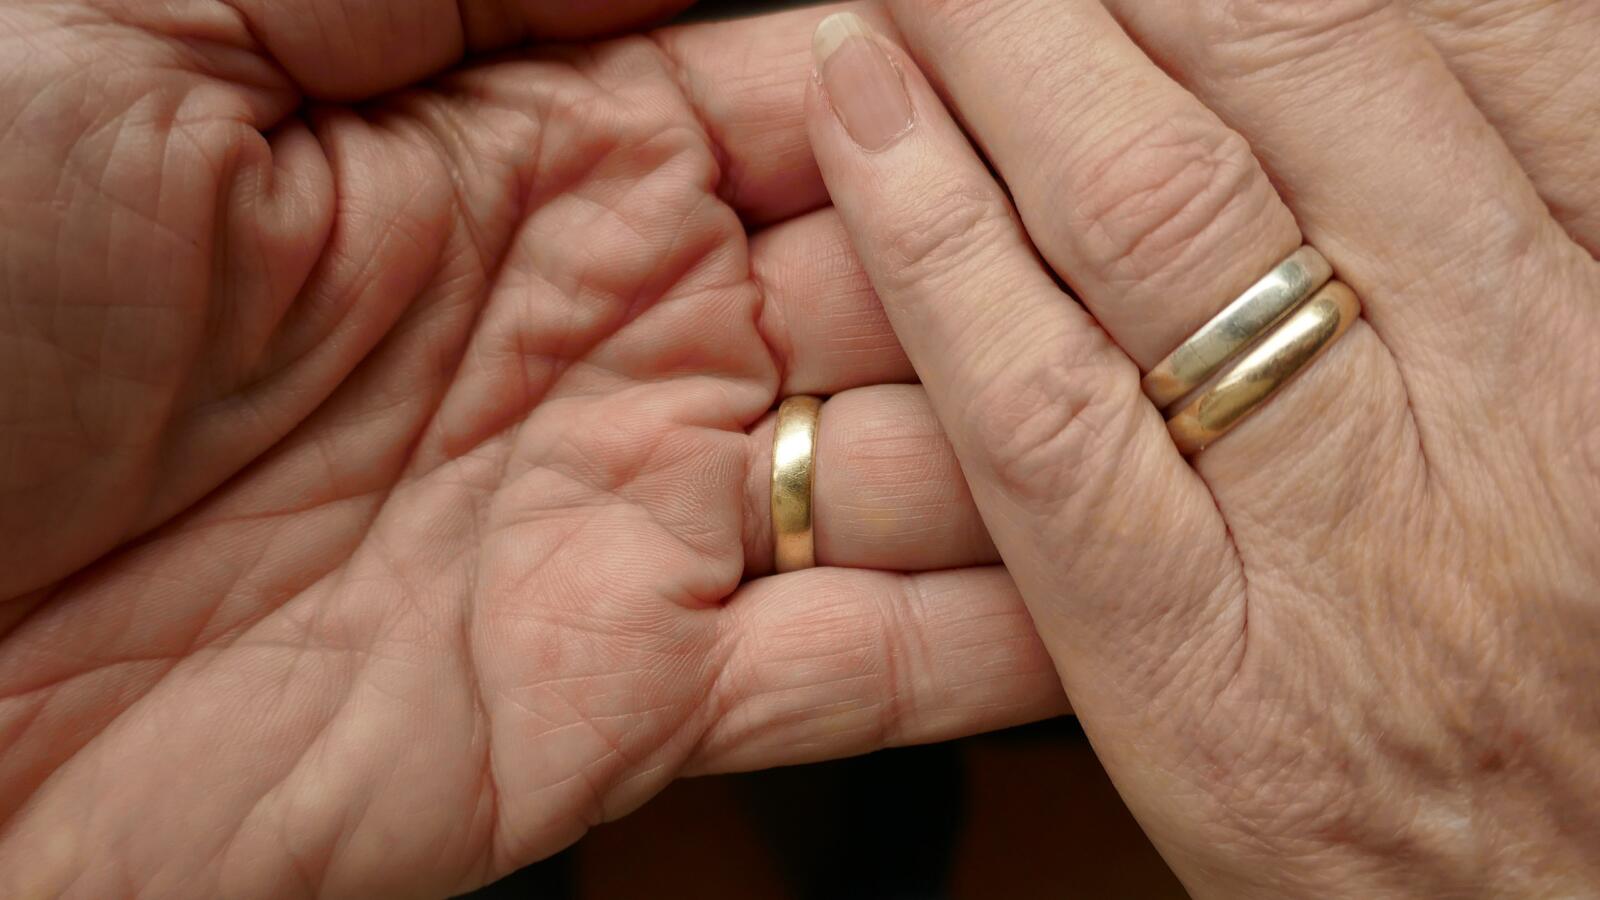 close up of hands with wedding rings